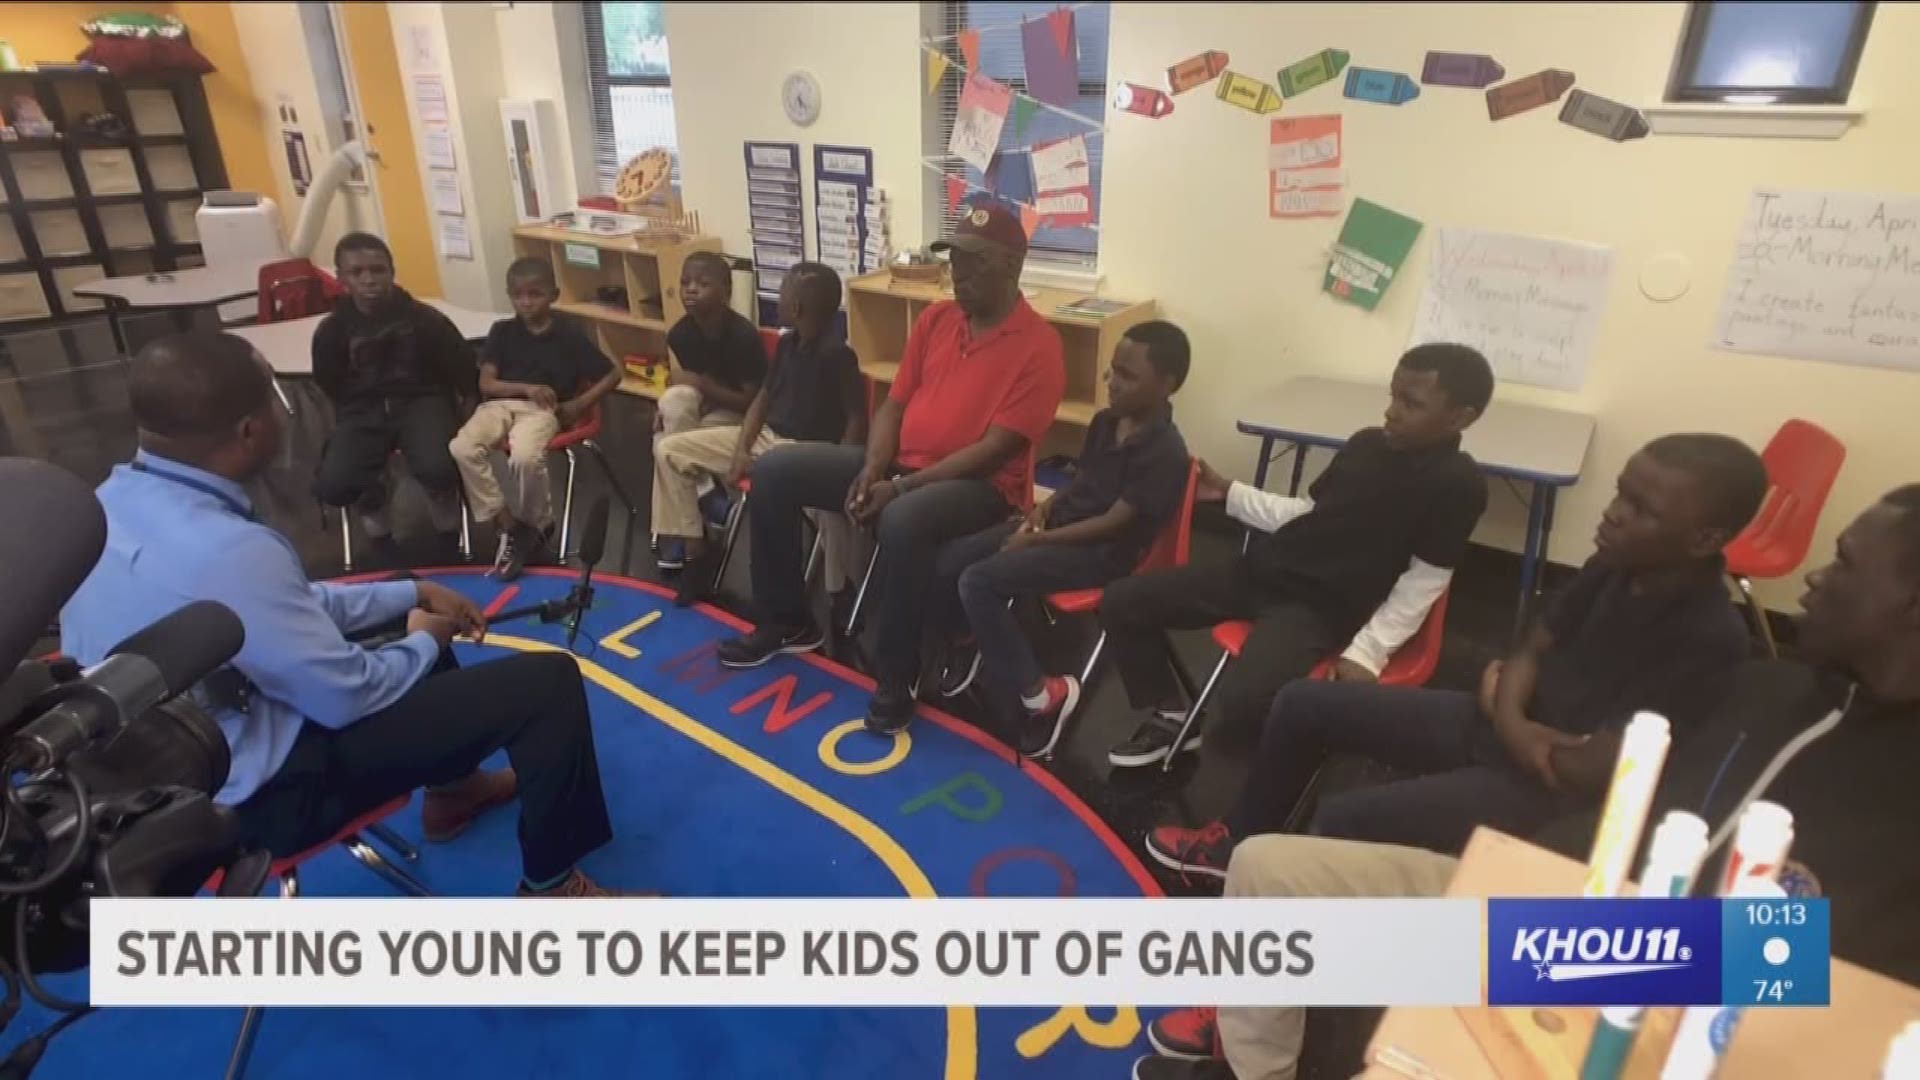 Generation One Academy is working with young kids to keep them out of Houston gangs